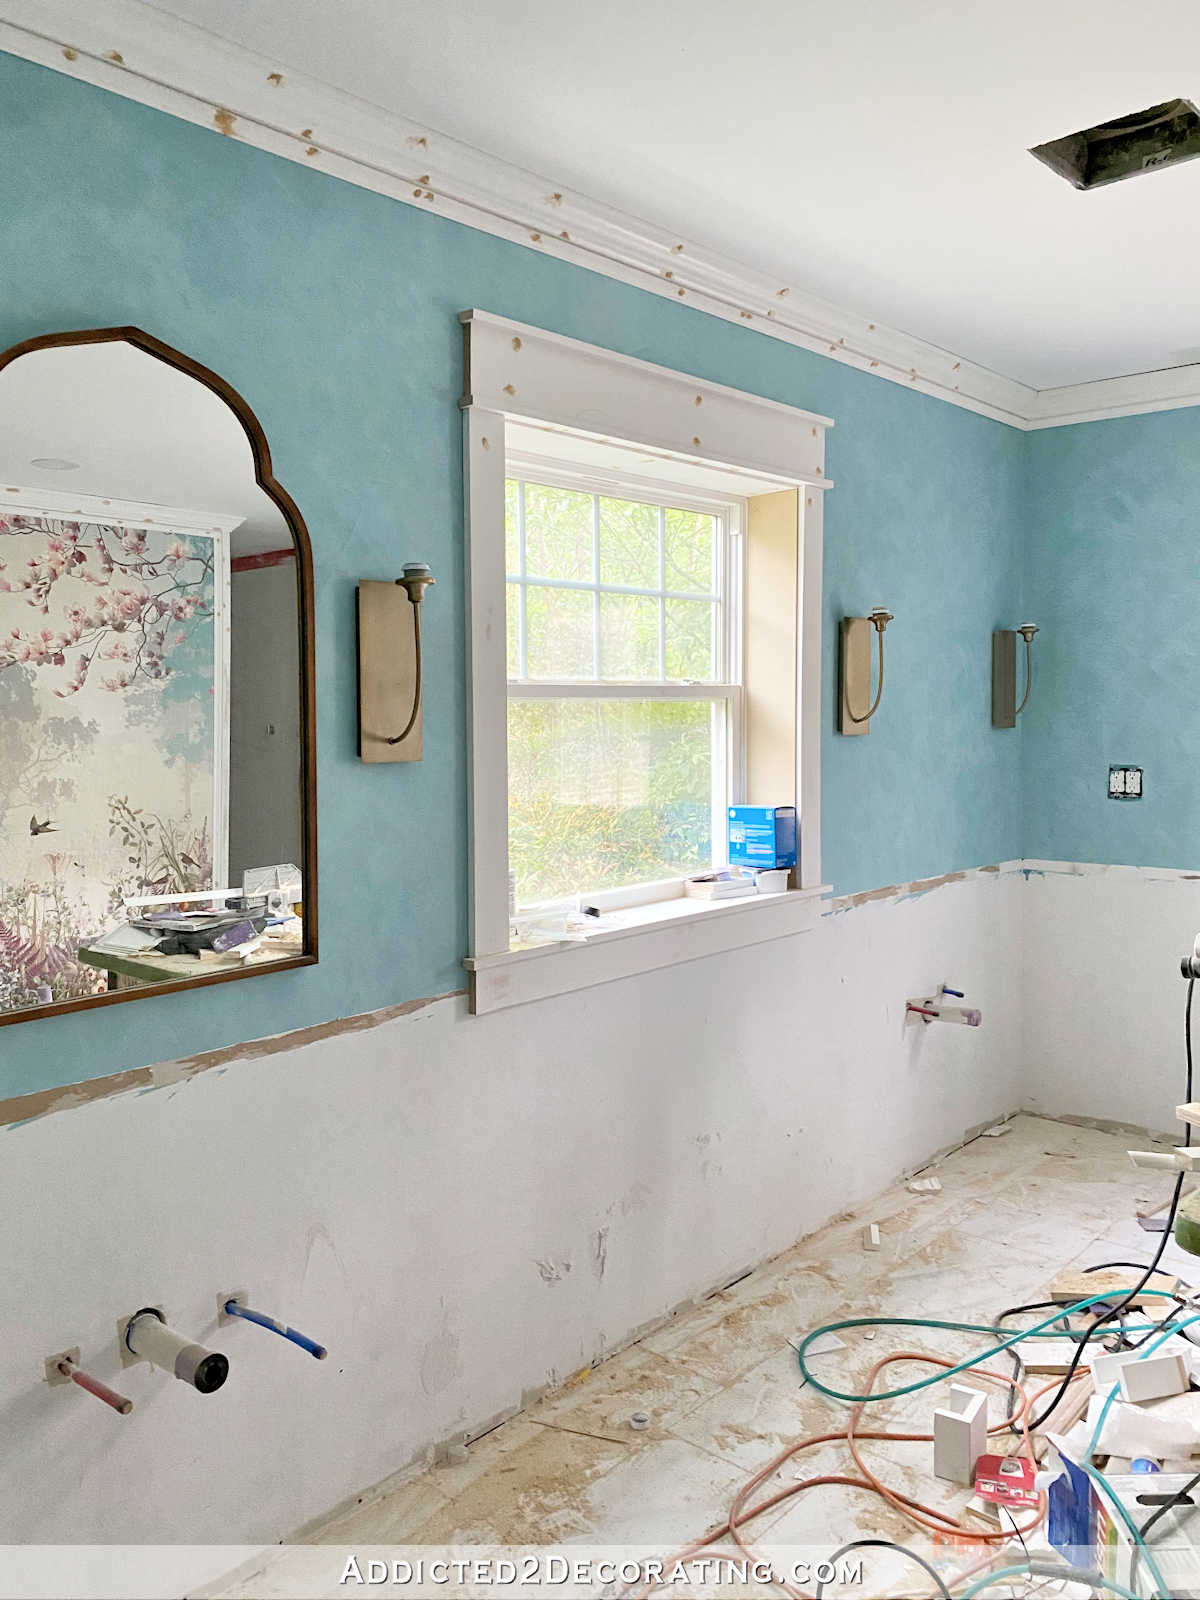 Master Bathroom – The Progress & What Still Needs To Be Done